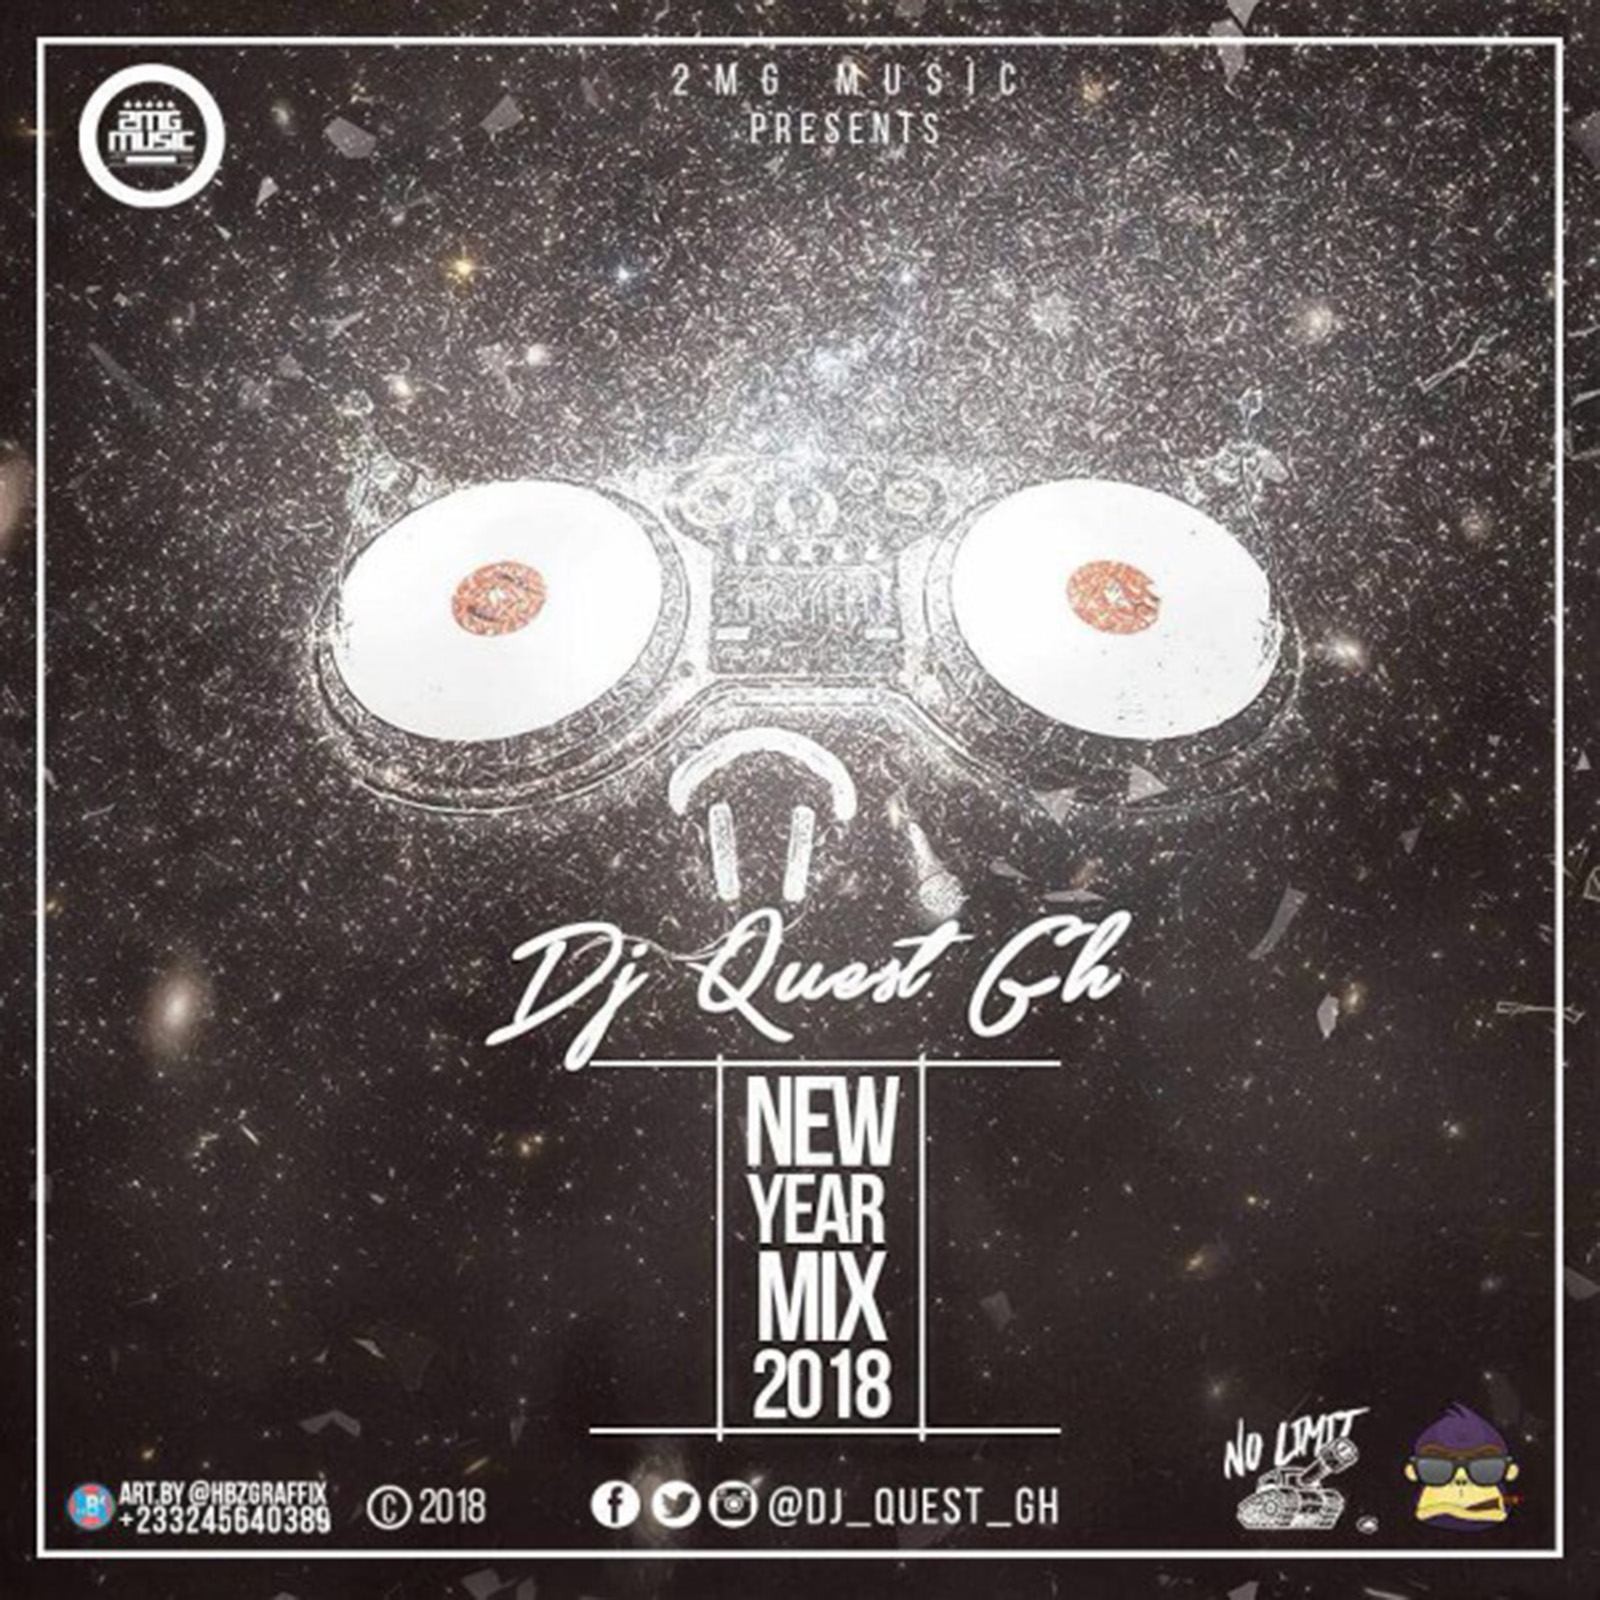 GH New Year Mix 2018 by DJ Quest